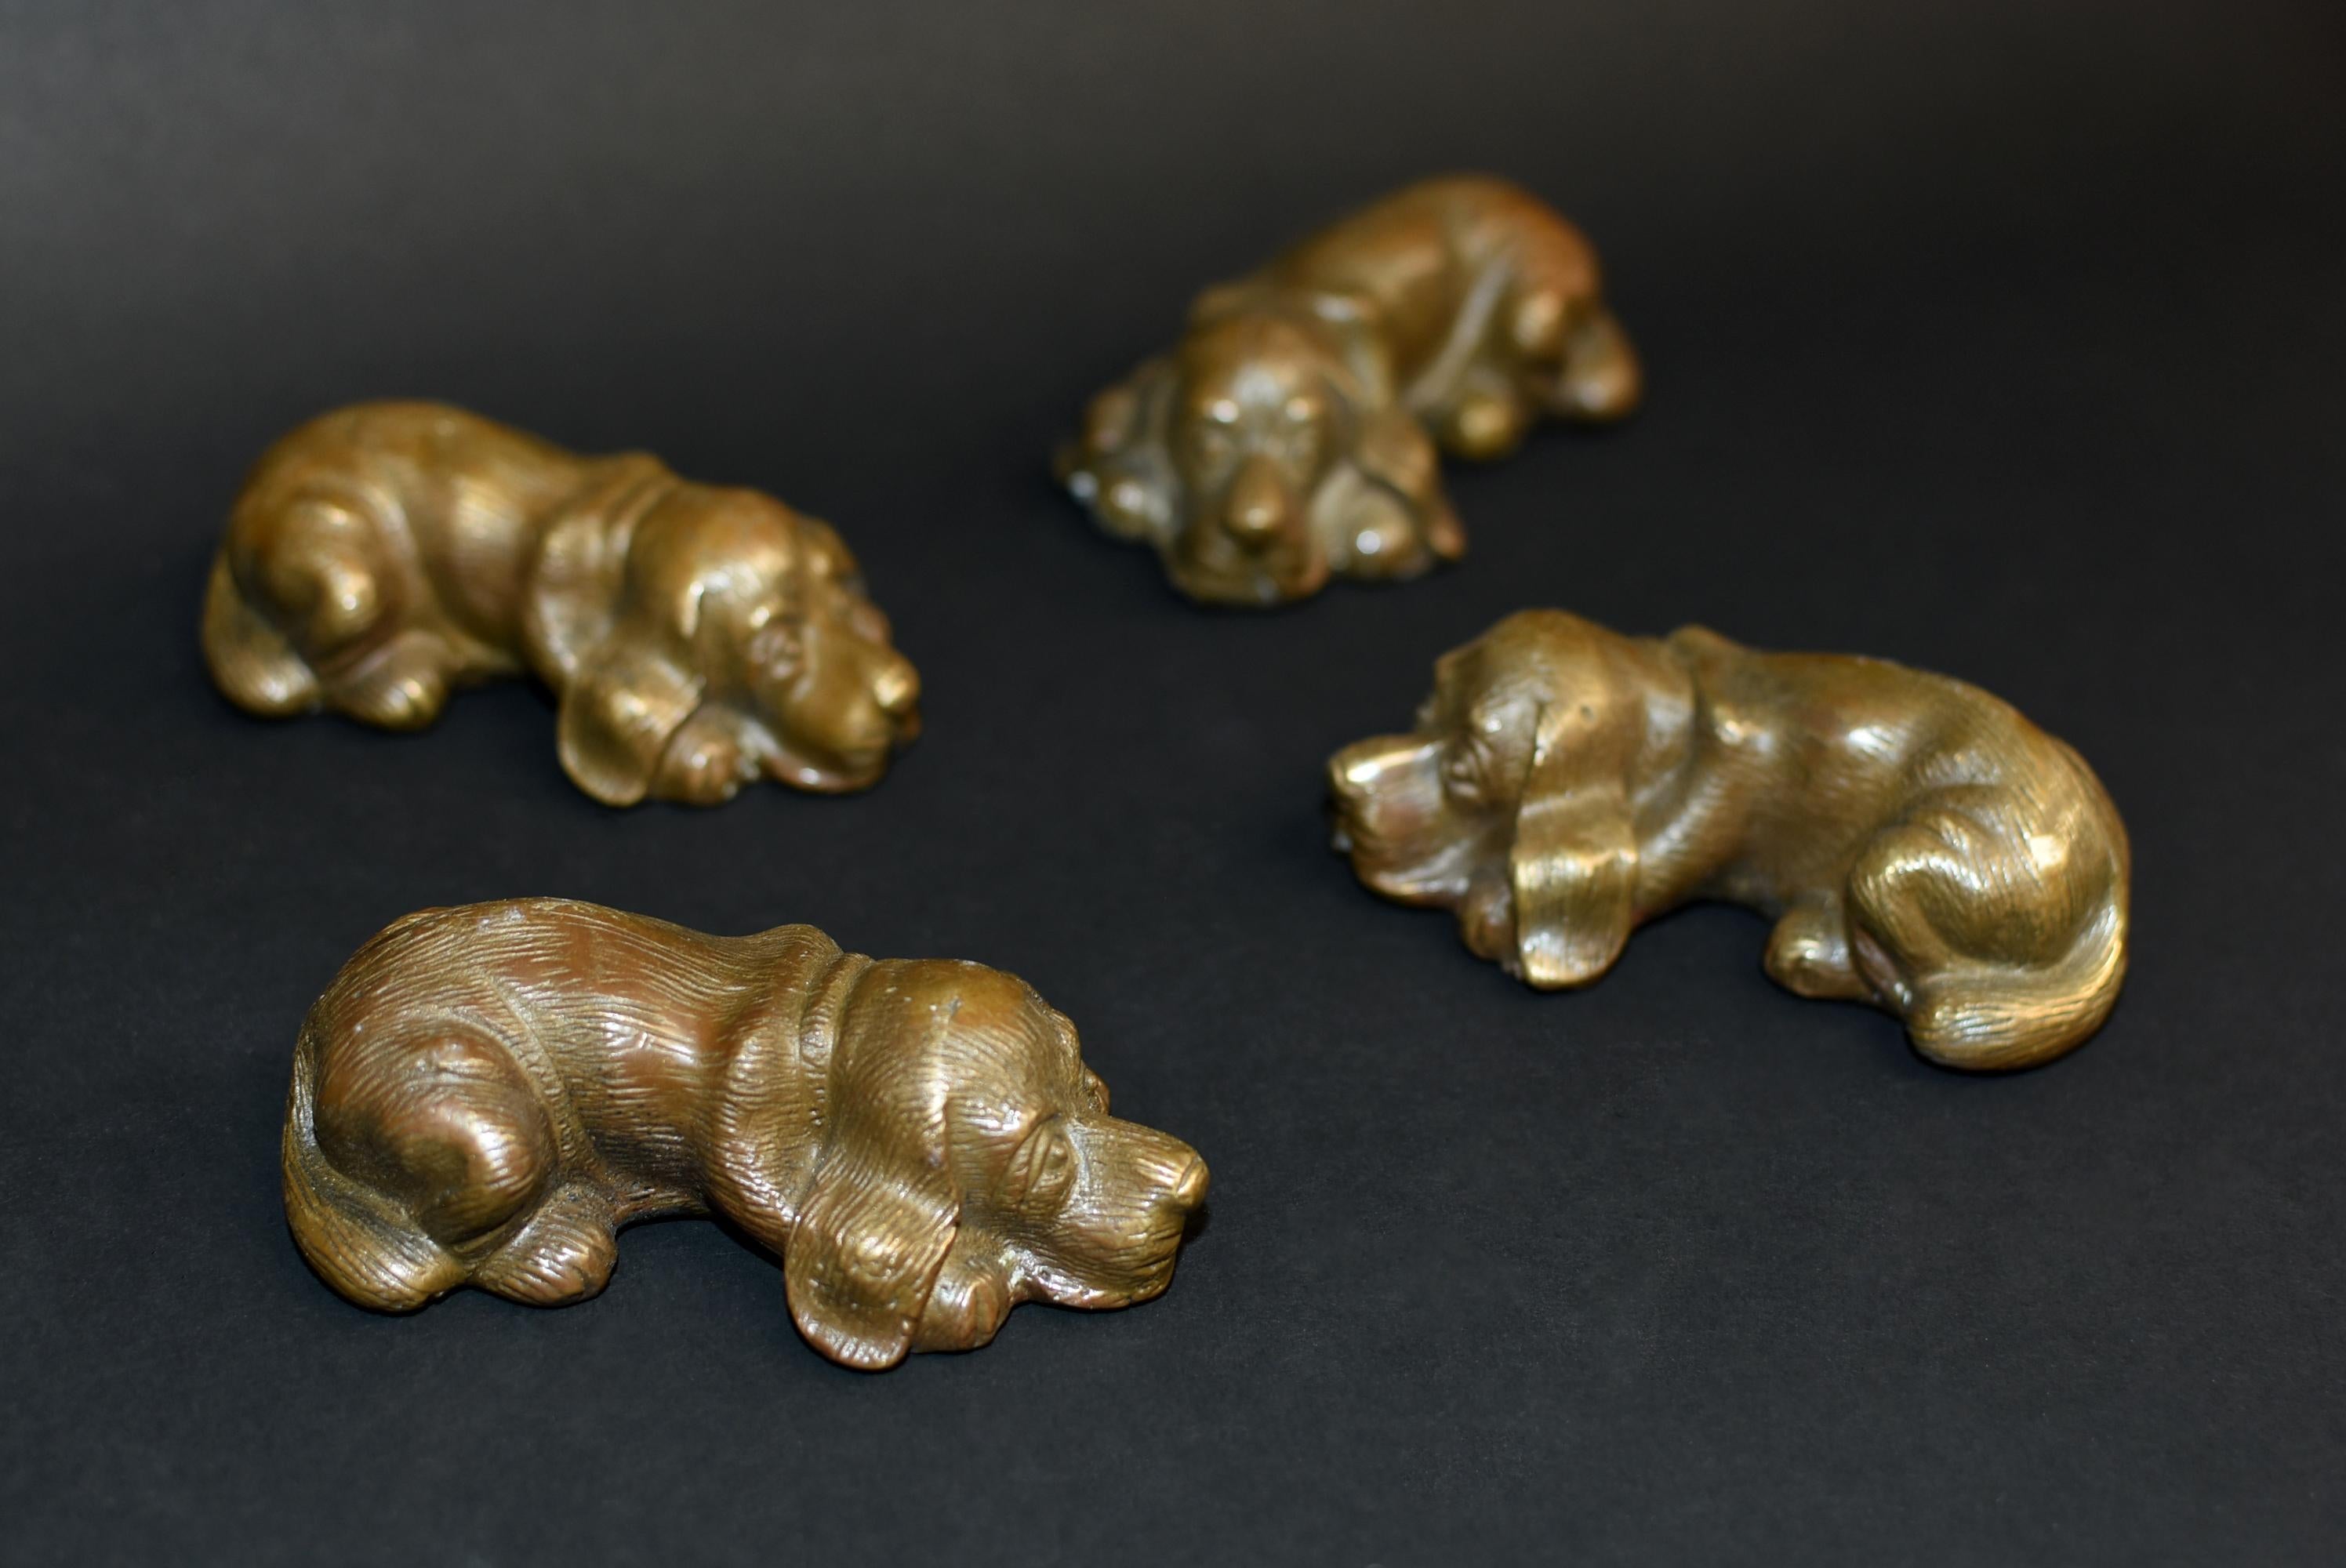 These little guys are such delights. Their adorable, sweet presence melt hearts. Wonderful details, vivid expression, fine craftsmanship. They are heavy and sturdy, ideal as paperweights.

